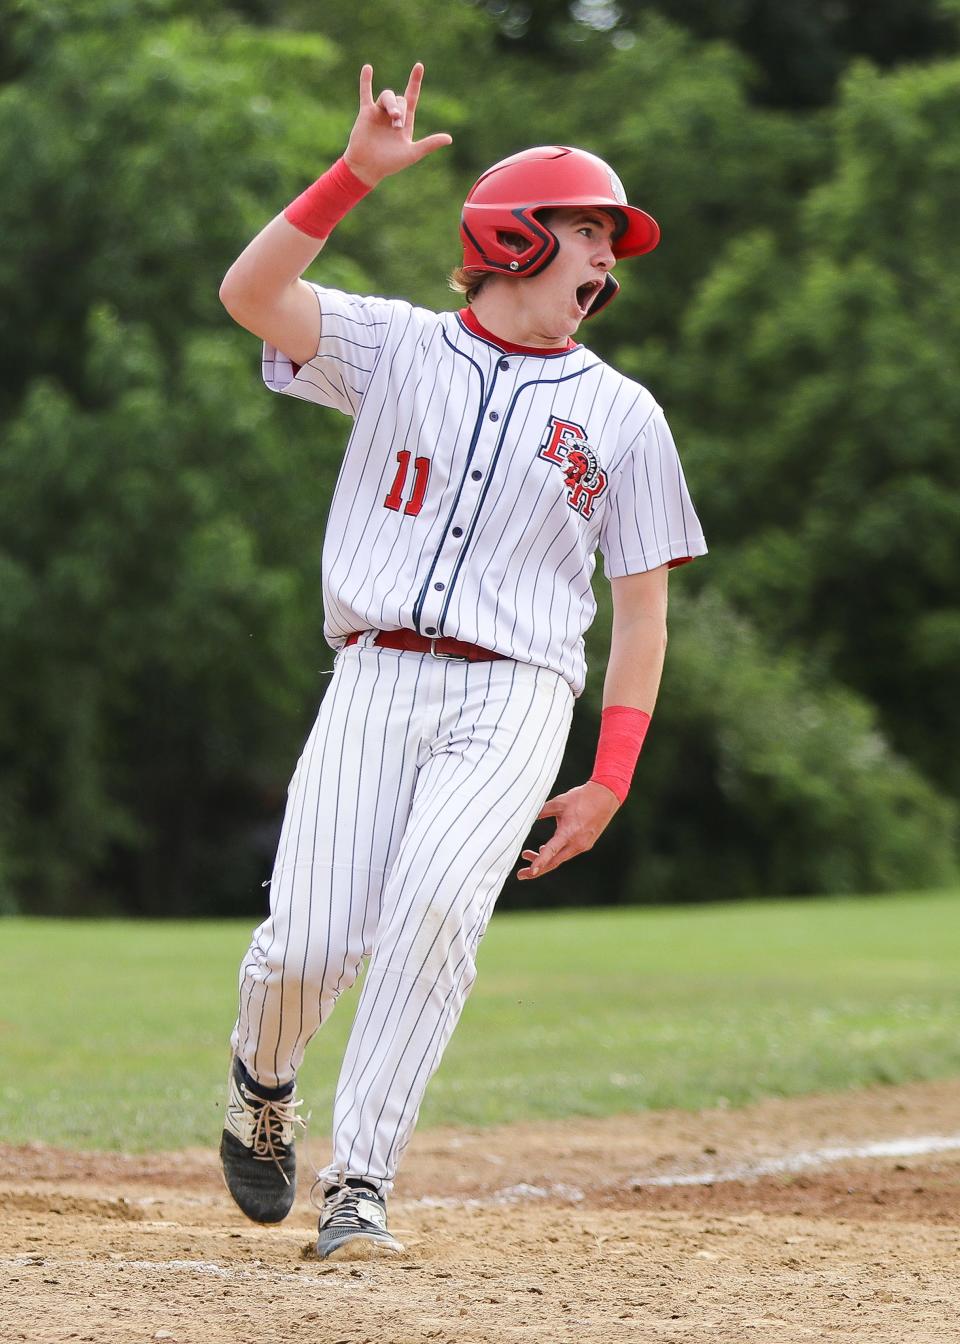 Bridgewater-Raynham's Owen King celebrates during a game in the Division 1 state tournament against Bishop Feehan on Monday, June 5, 2023.